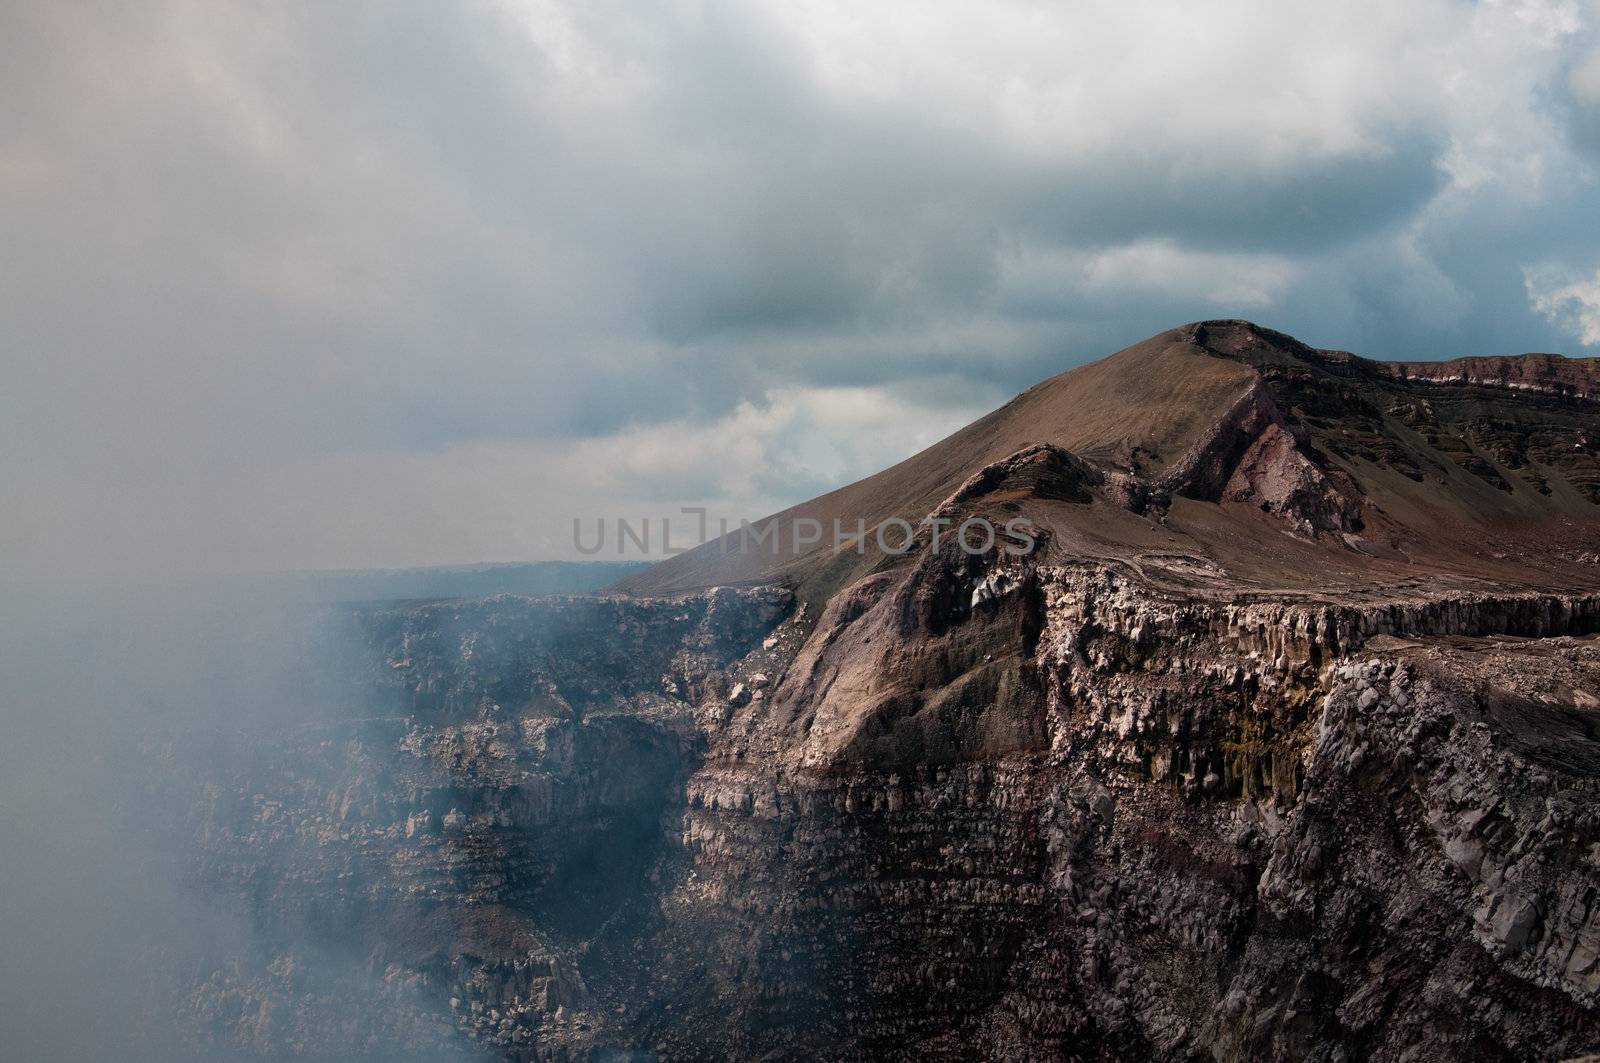 The picture of the volcanic landscape of the volcan Masaya